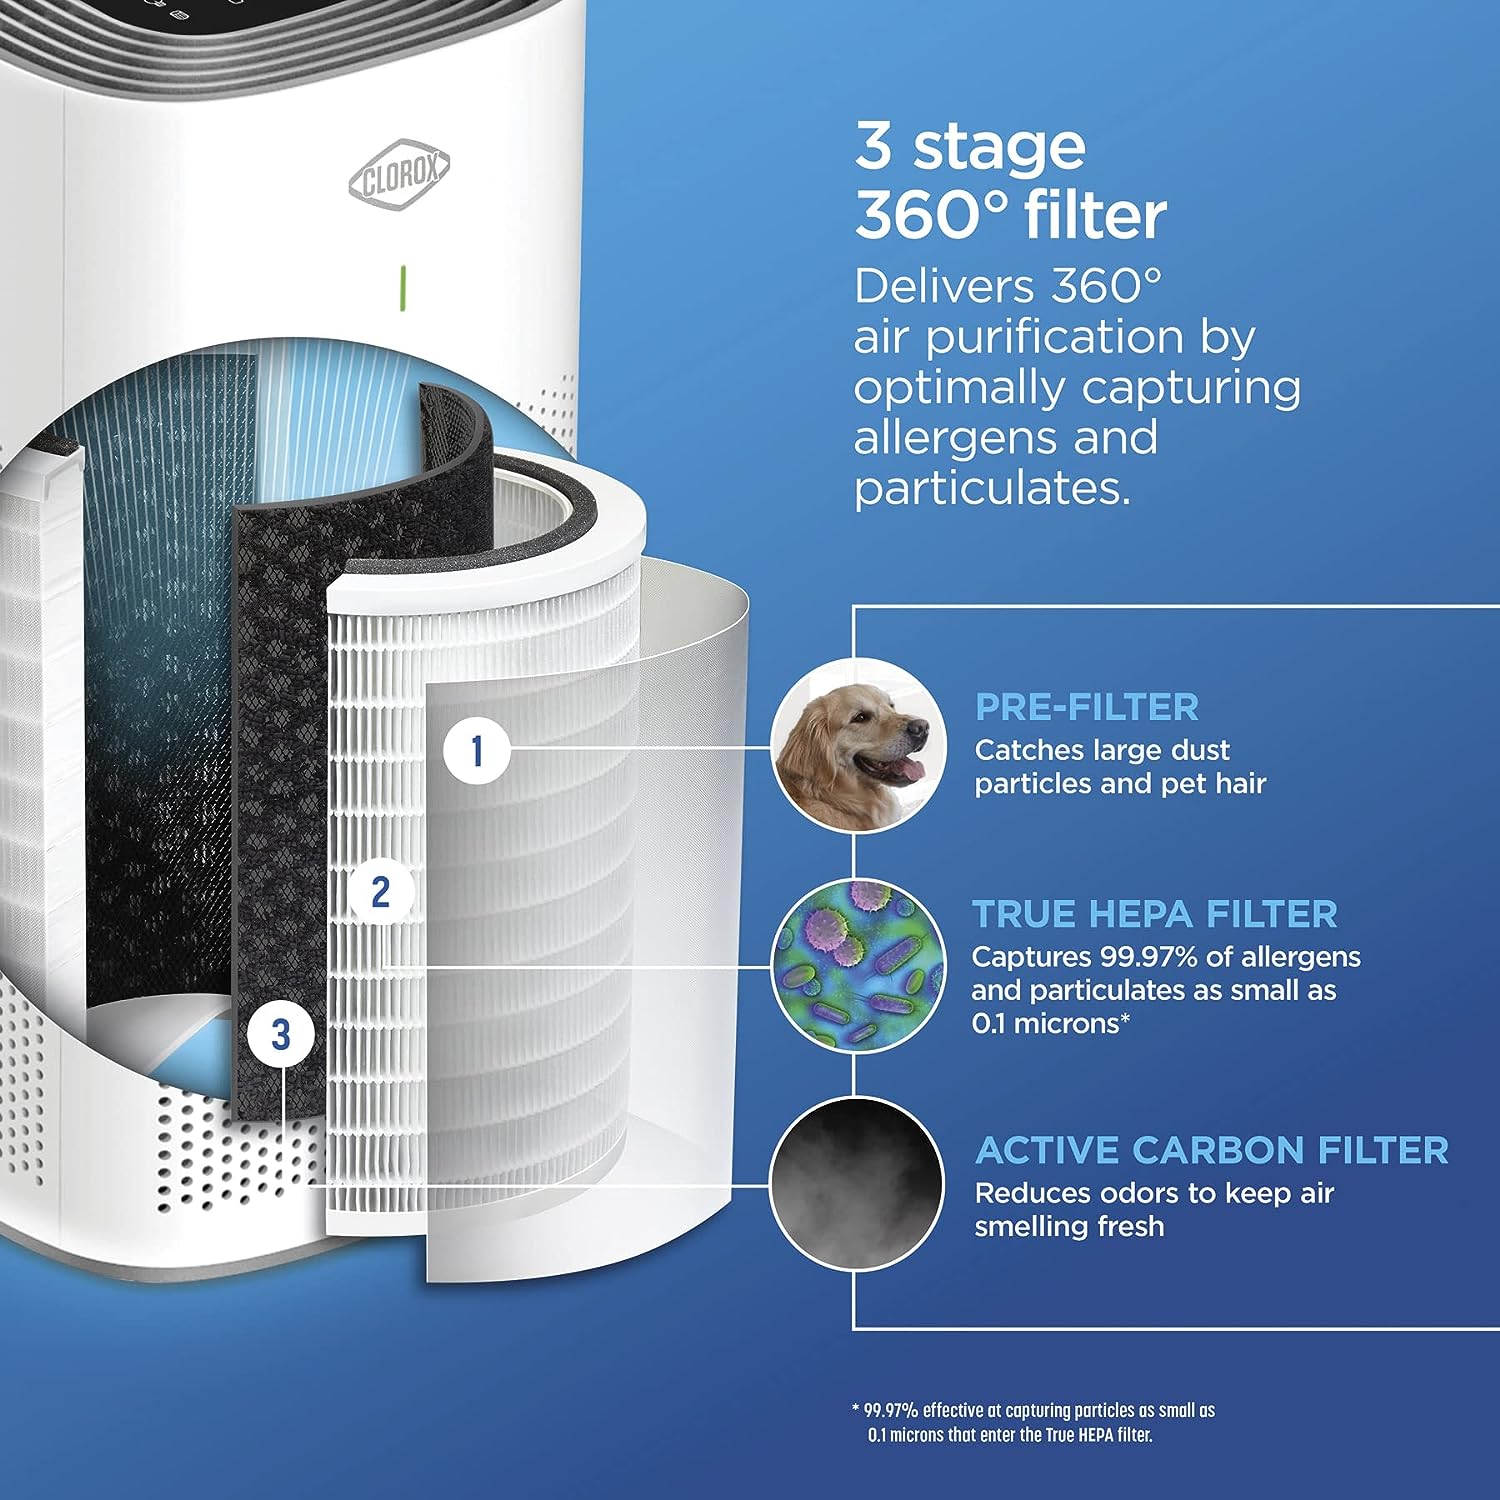 Breakdown of Clorox Air Purifiers for Home